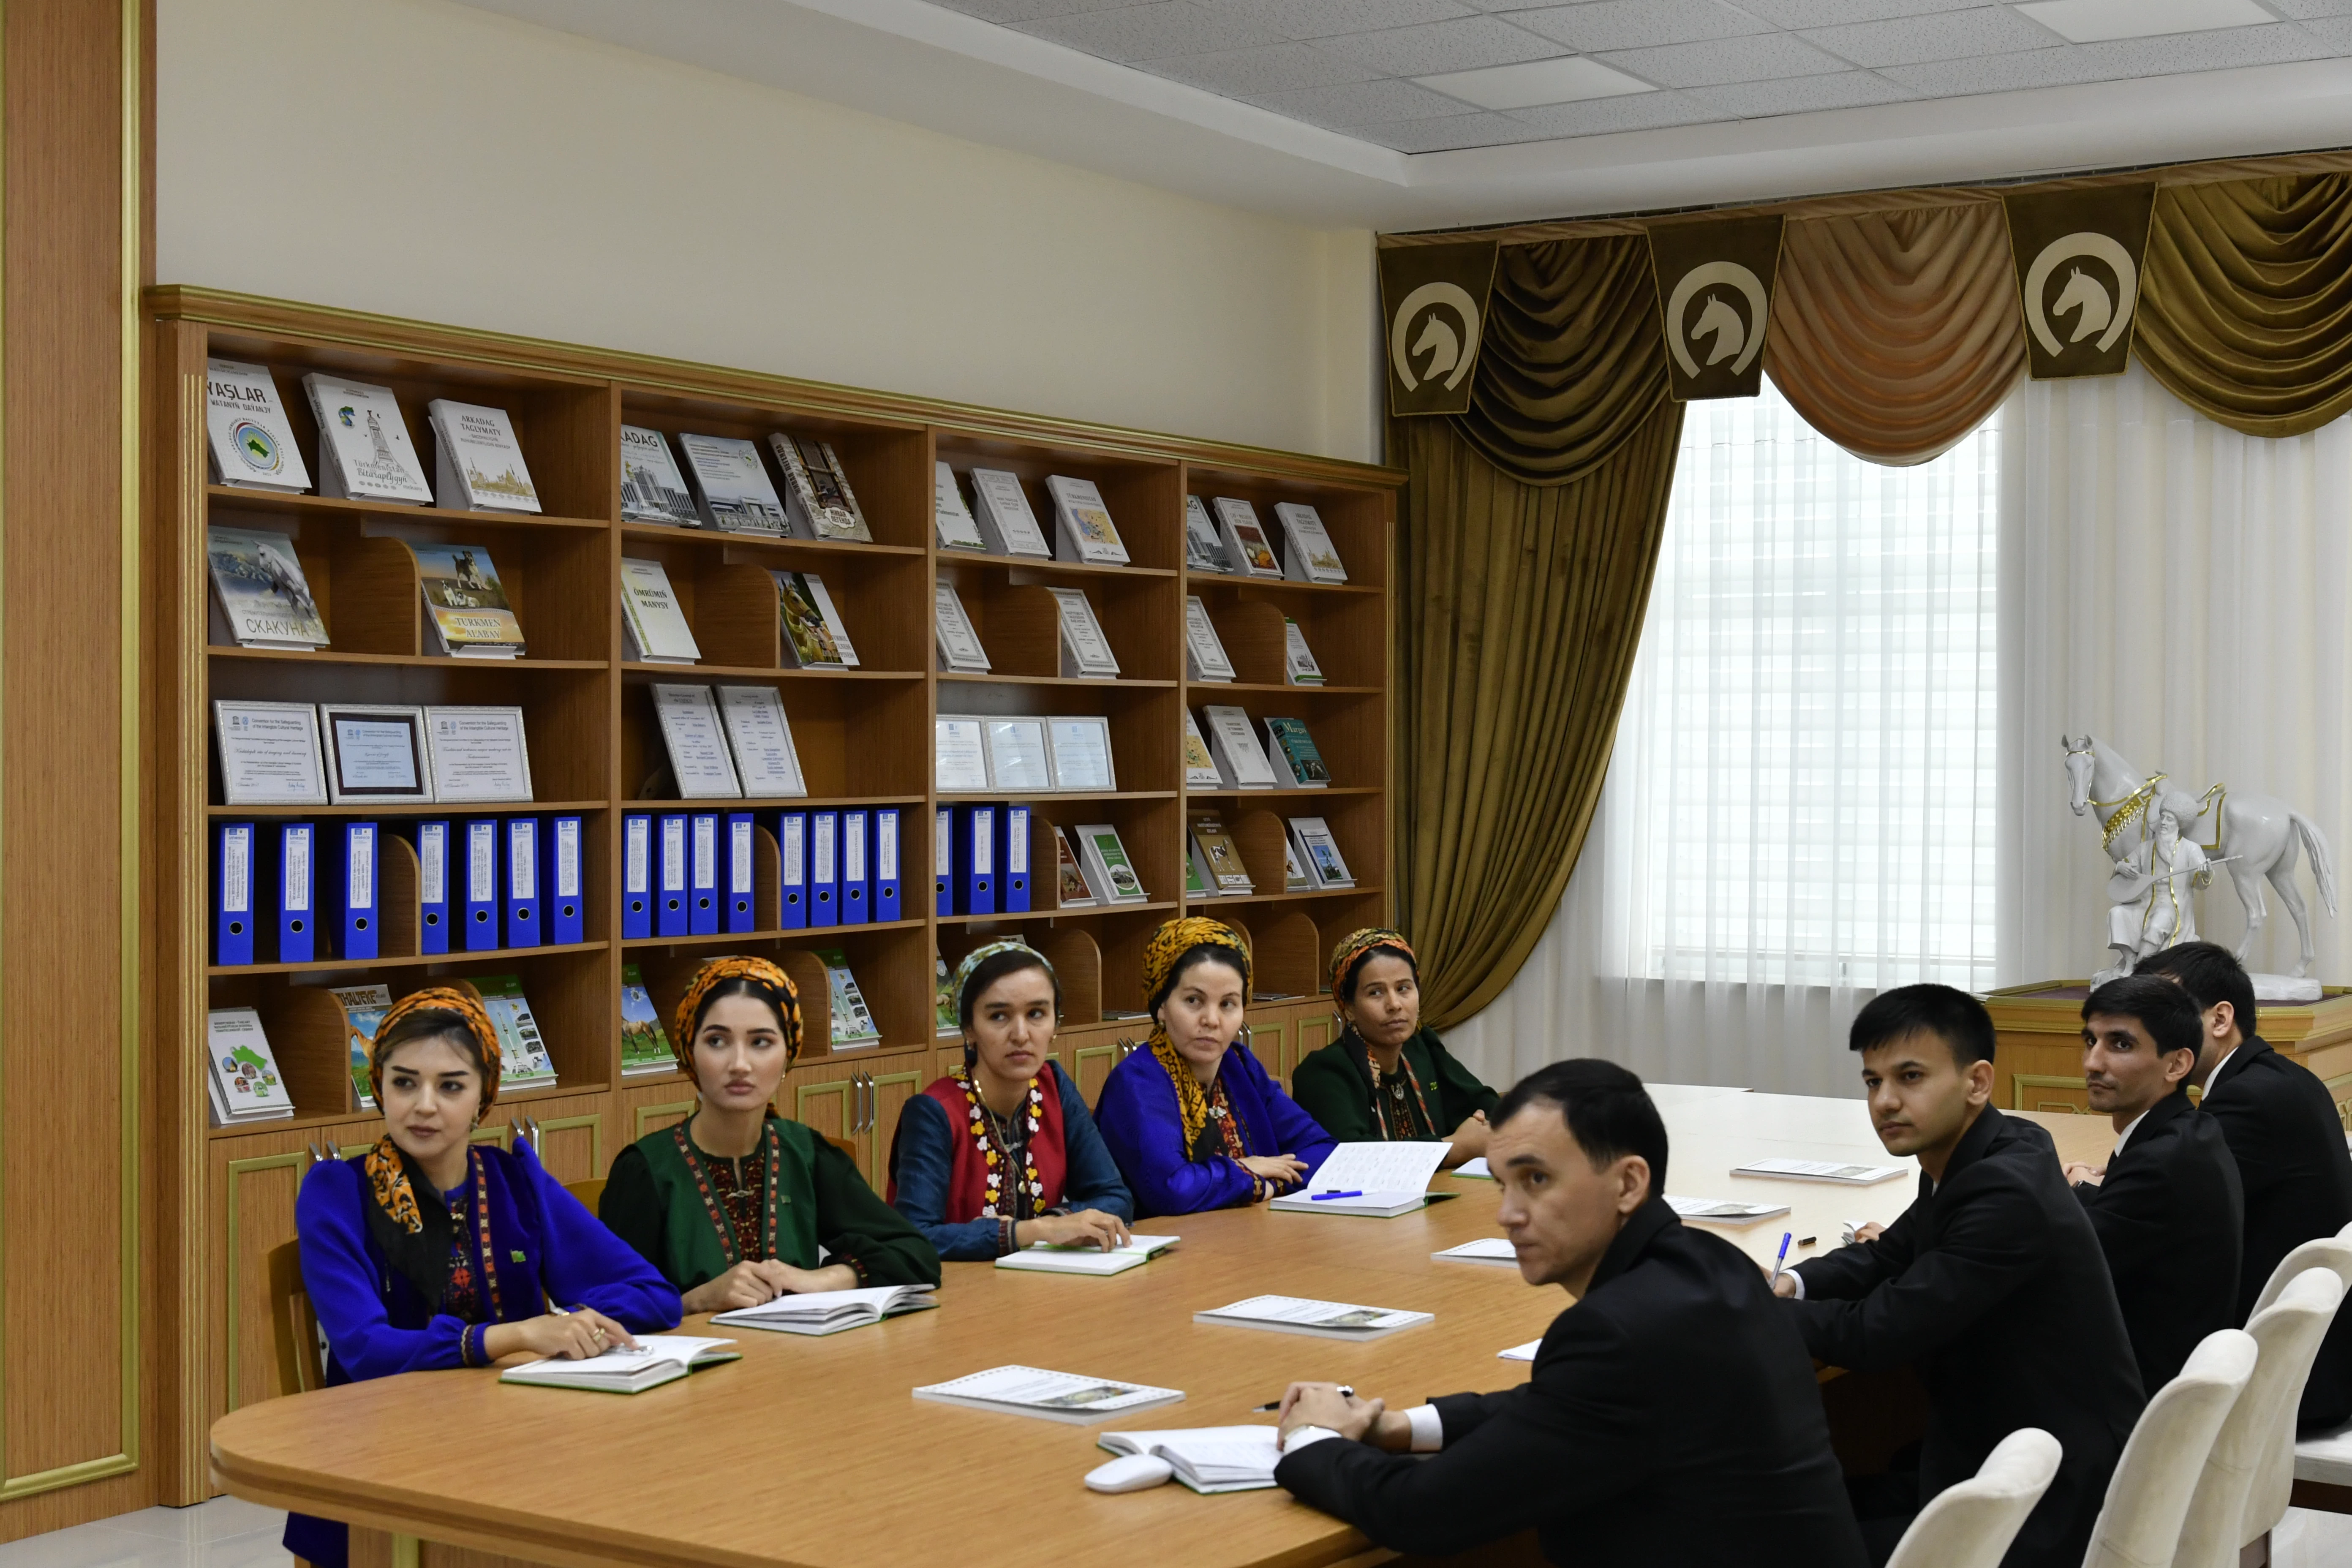 A SEMINAR WAS HELD ON THE FEATURES OF CELEBRATING THE INTERNATIONAL NOWROZ HOLIDAY IN TURKIC PEOPLE